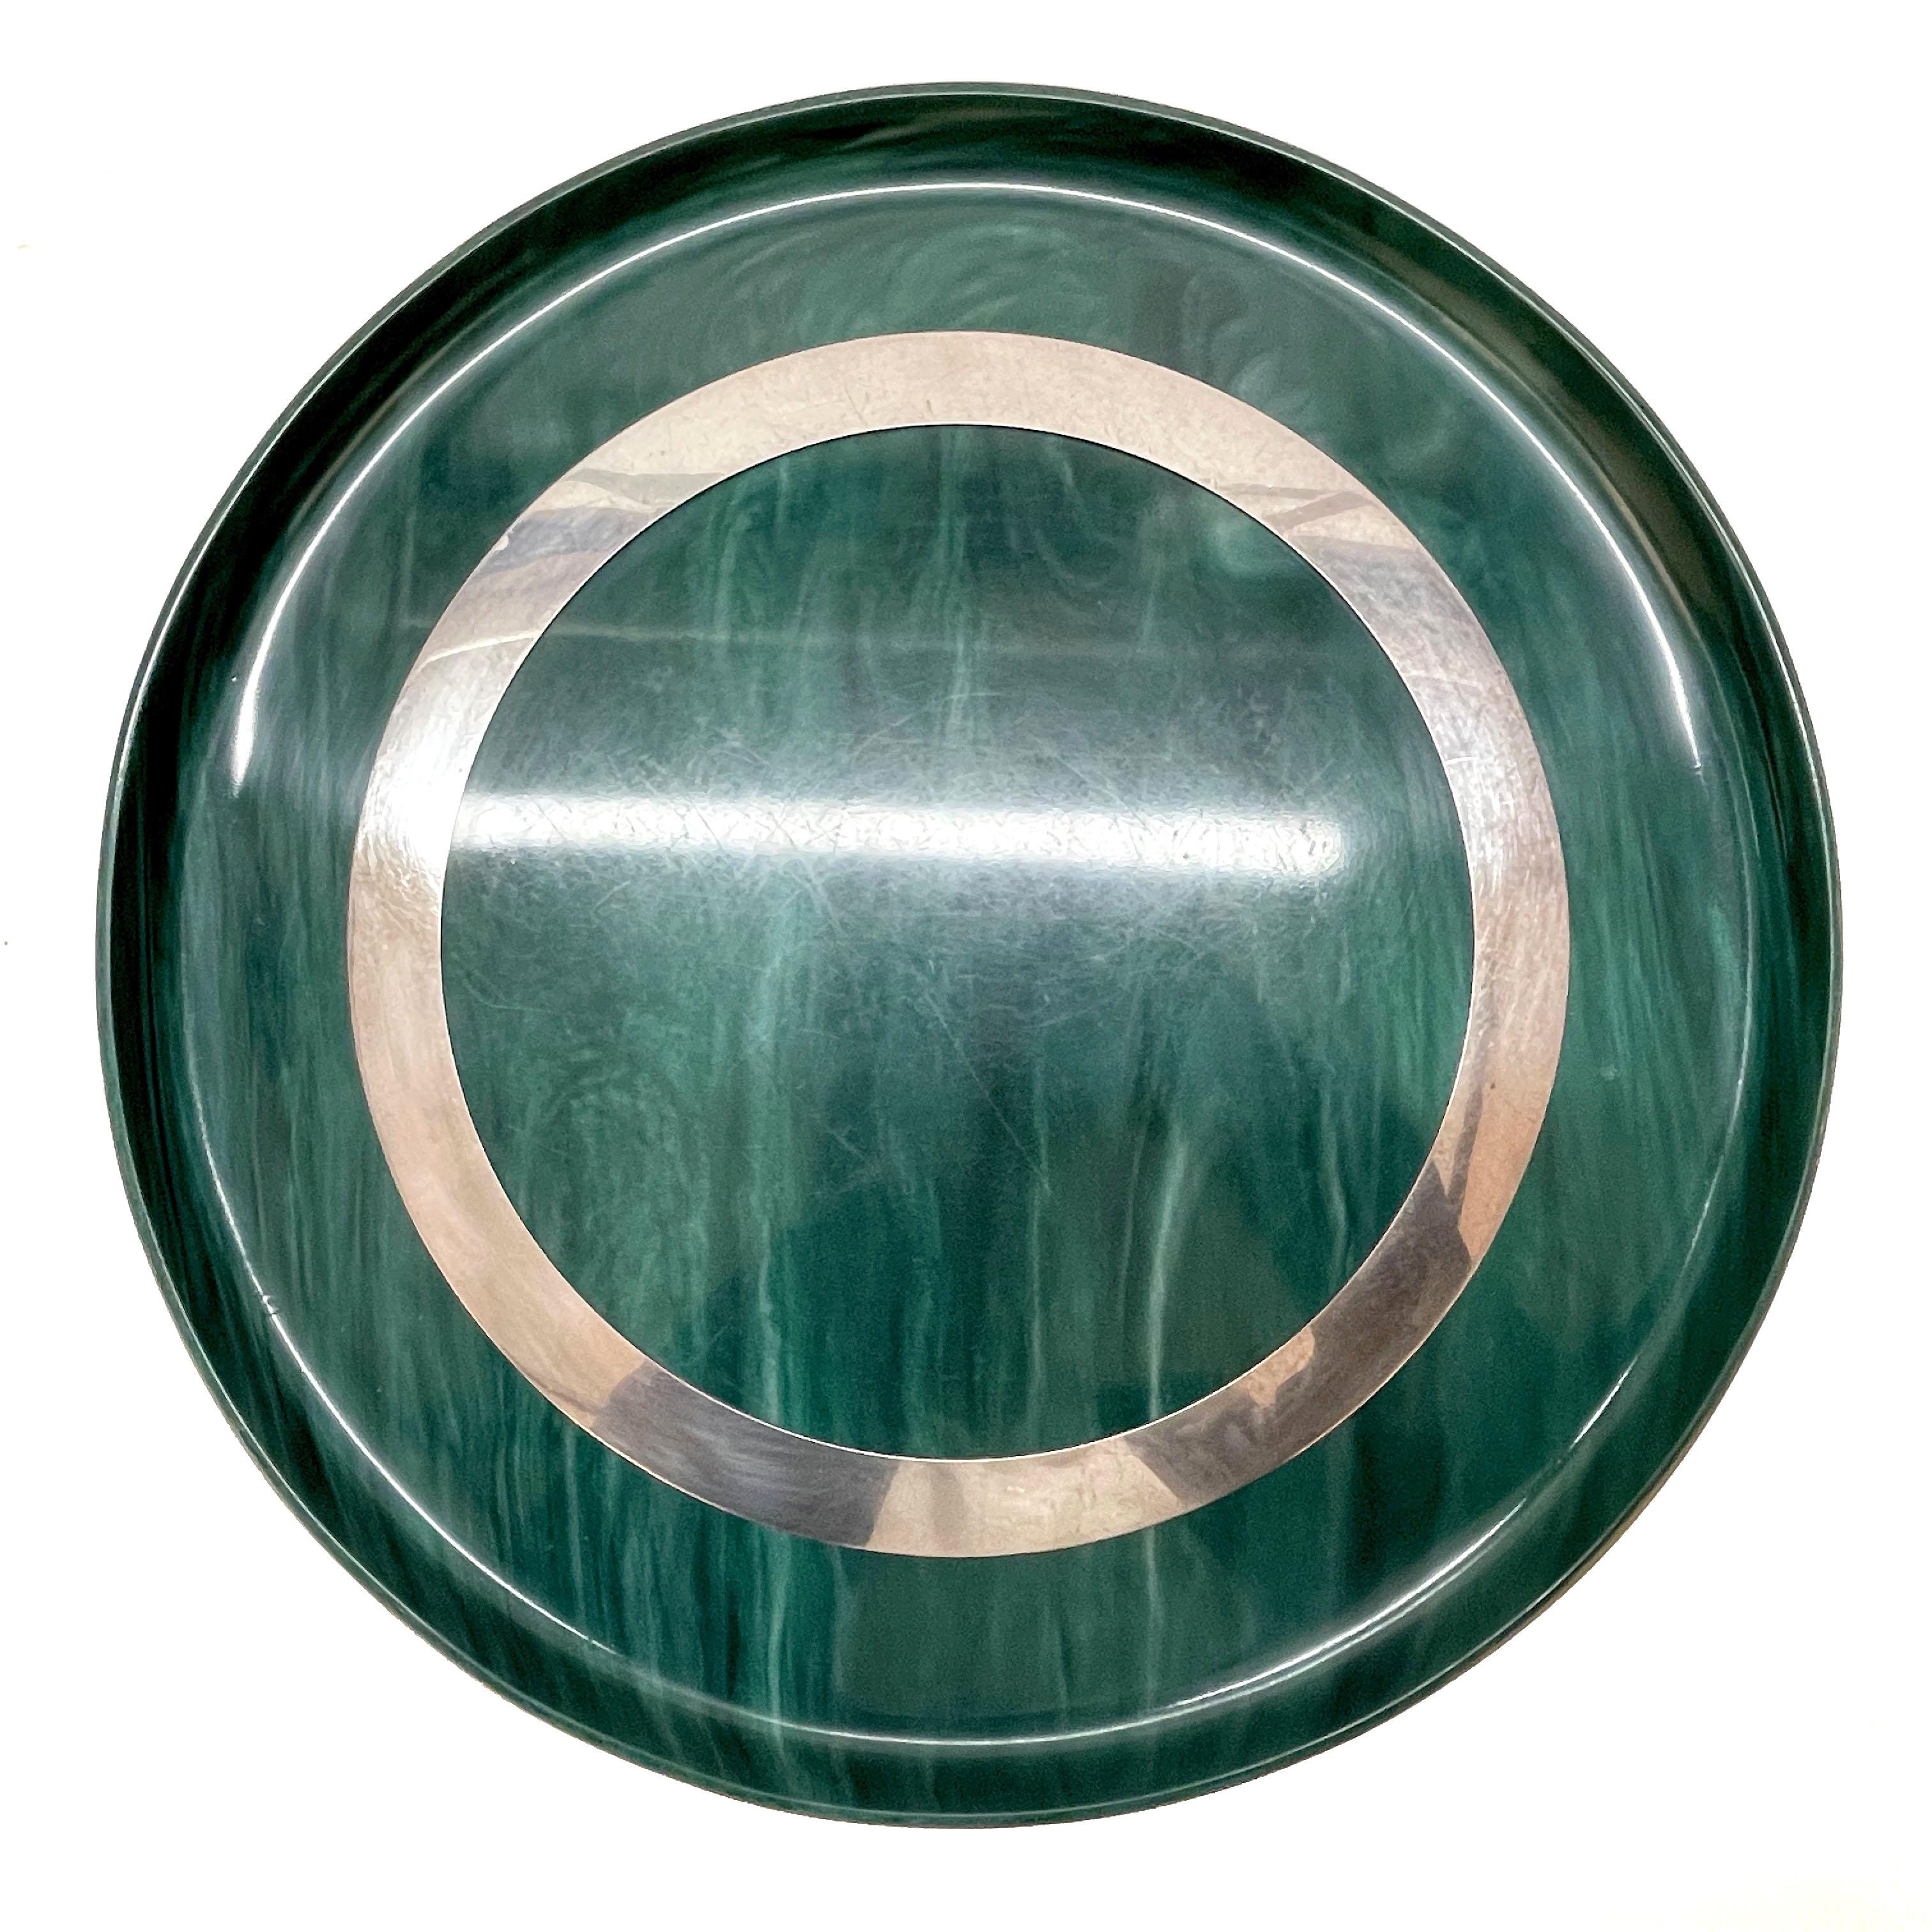 Midcentury Large Round GreenBakelite and Steel Italian Round Serving Tray, 1980s For Sale 1